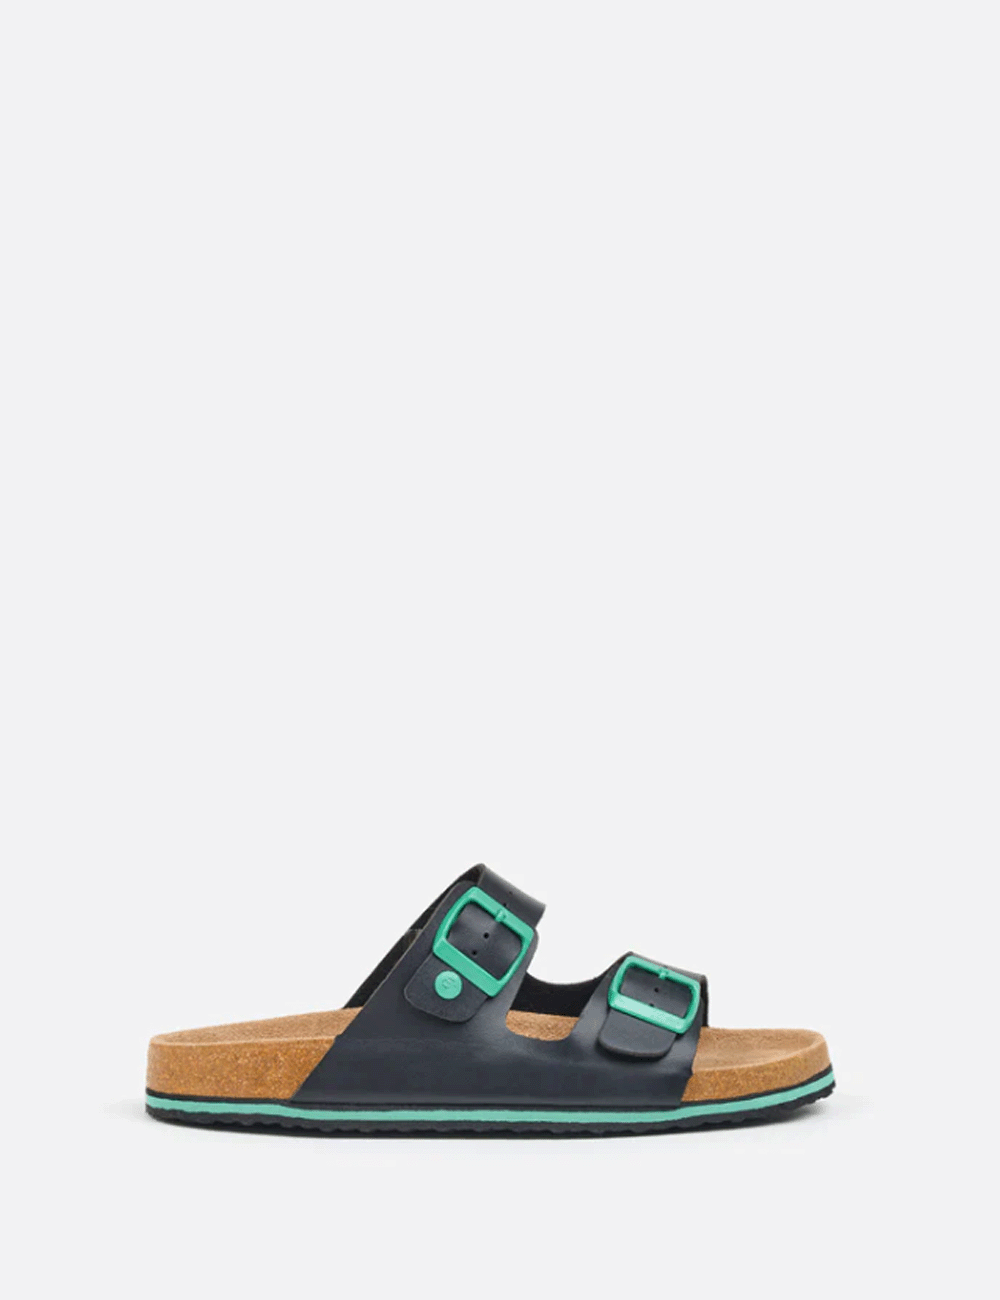 The right foot of the Kelly Pop Sandal on a grey background